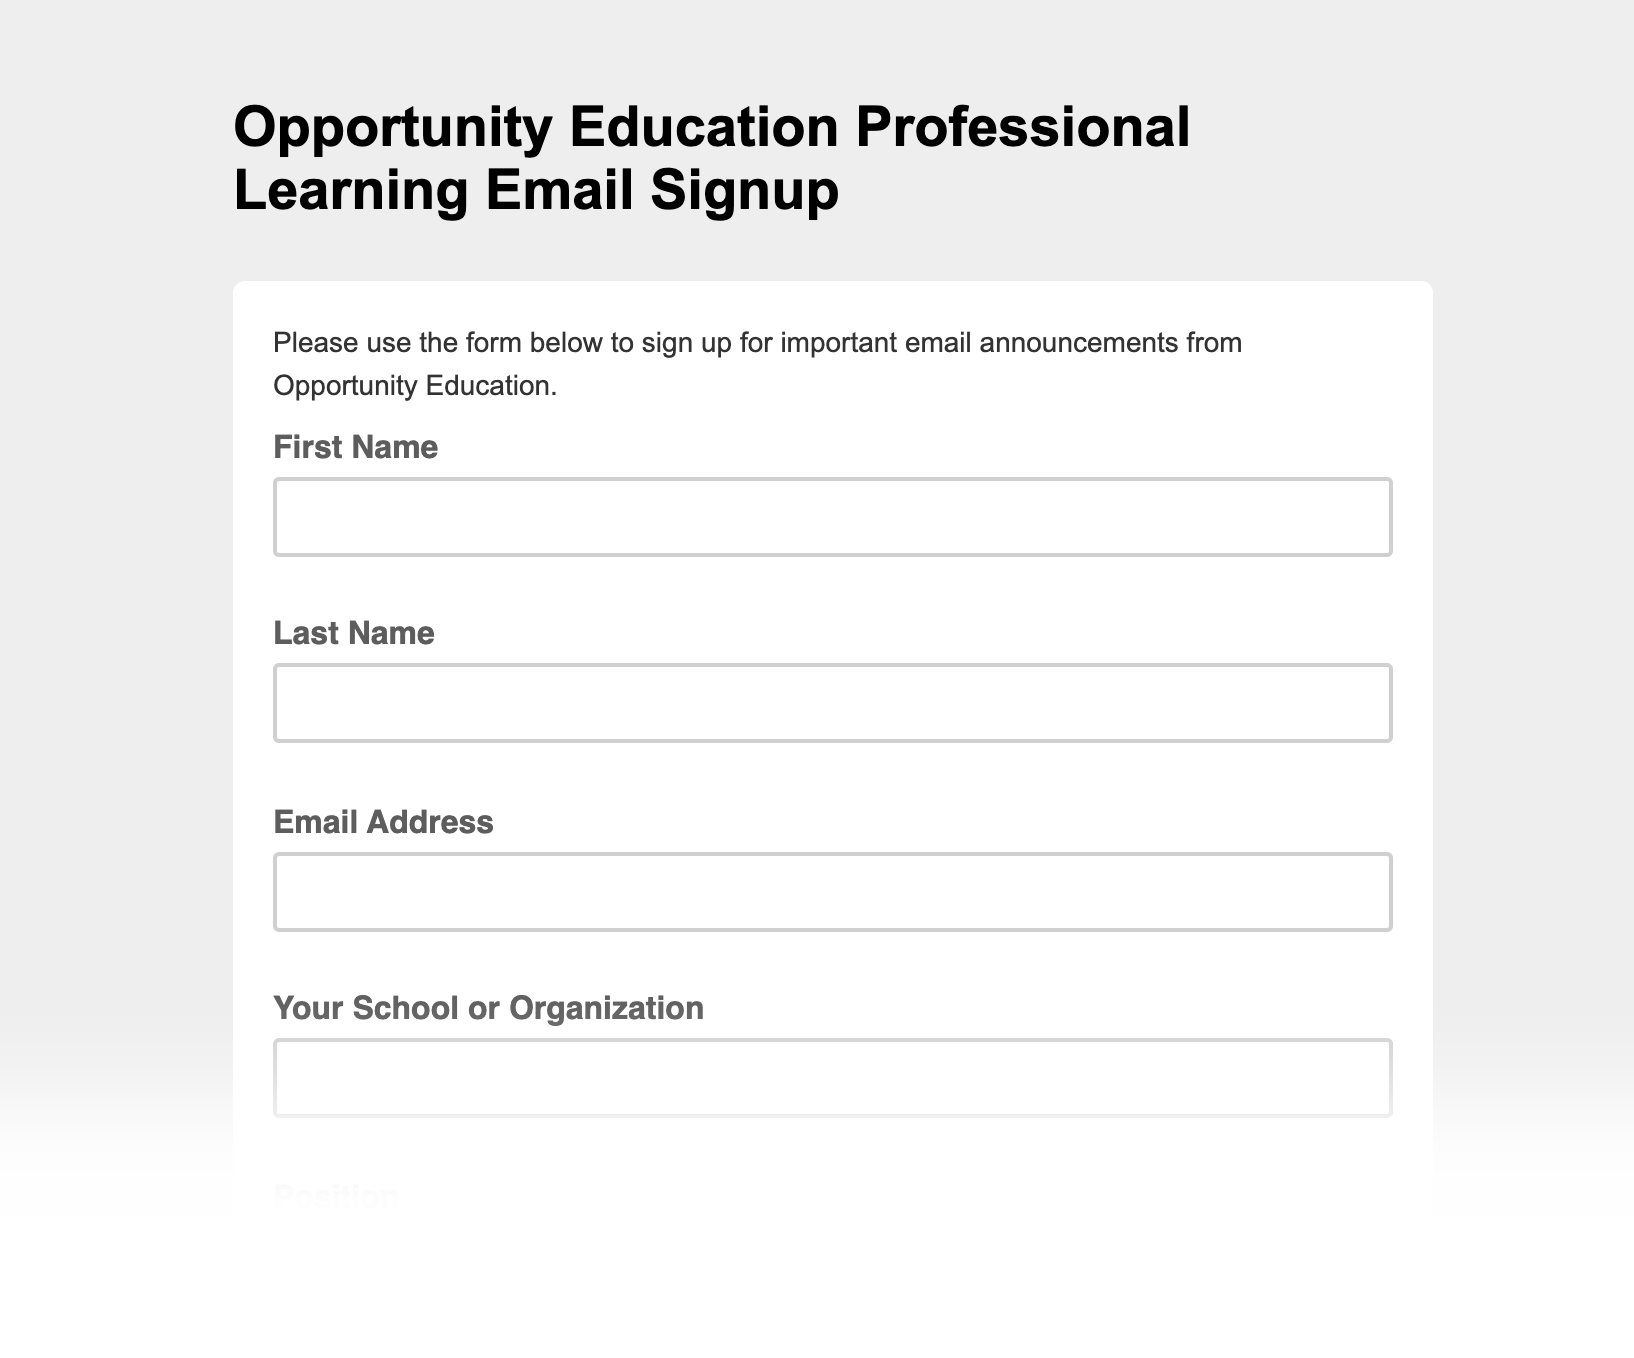 A screenshot of the MailChimp form to sign up for email updates from Opportunity Education